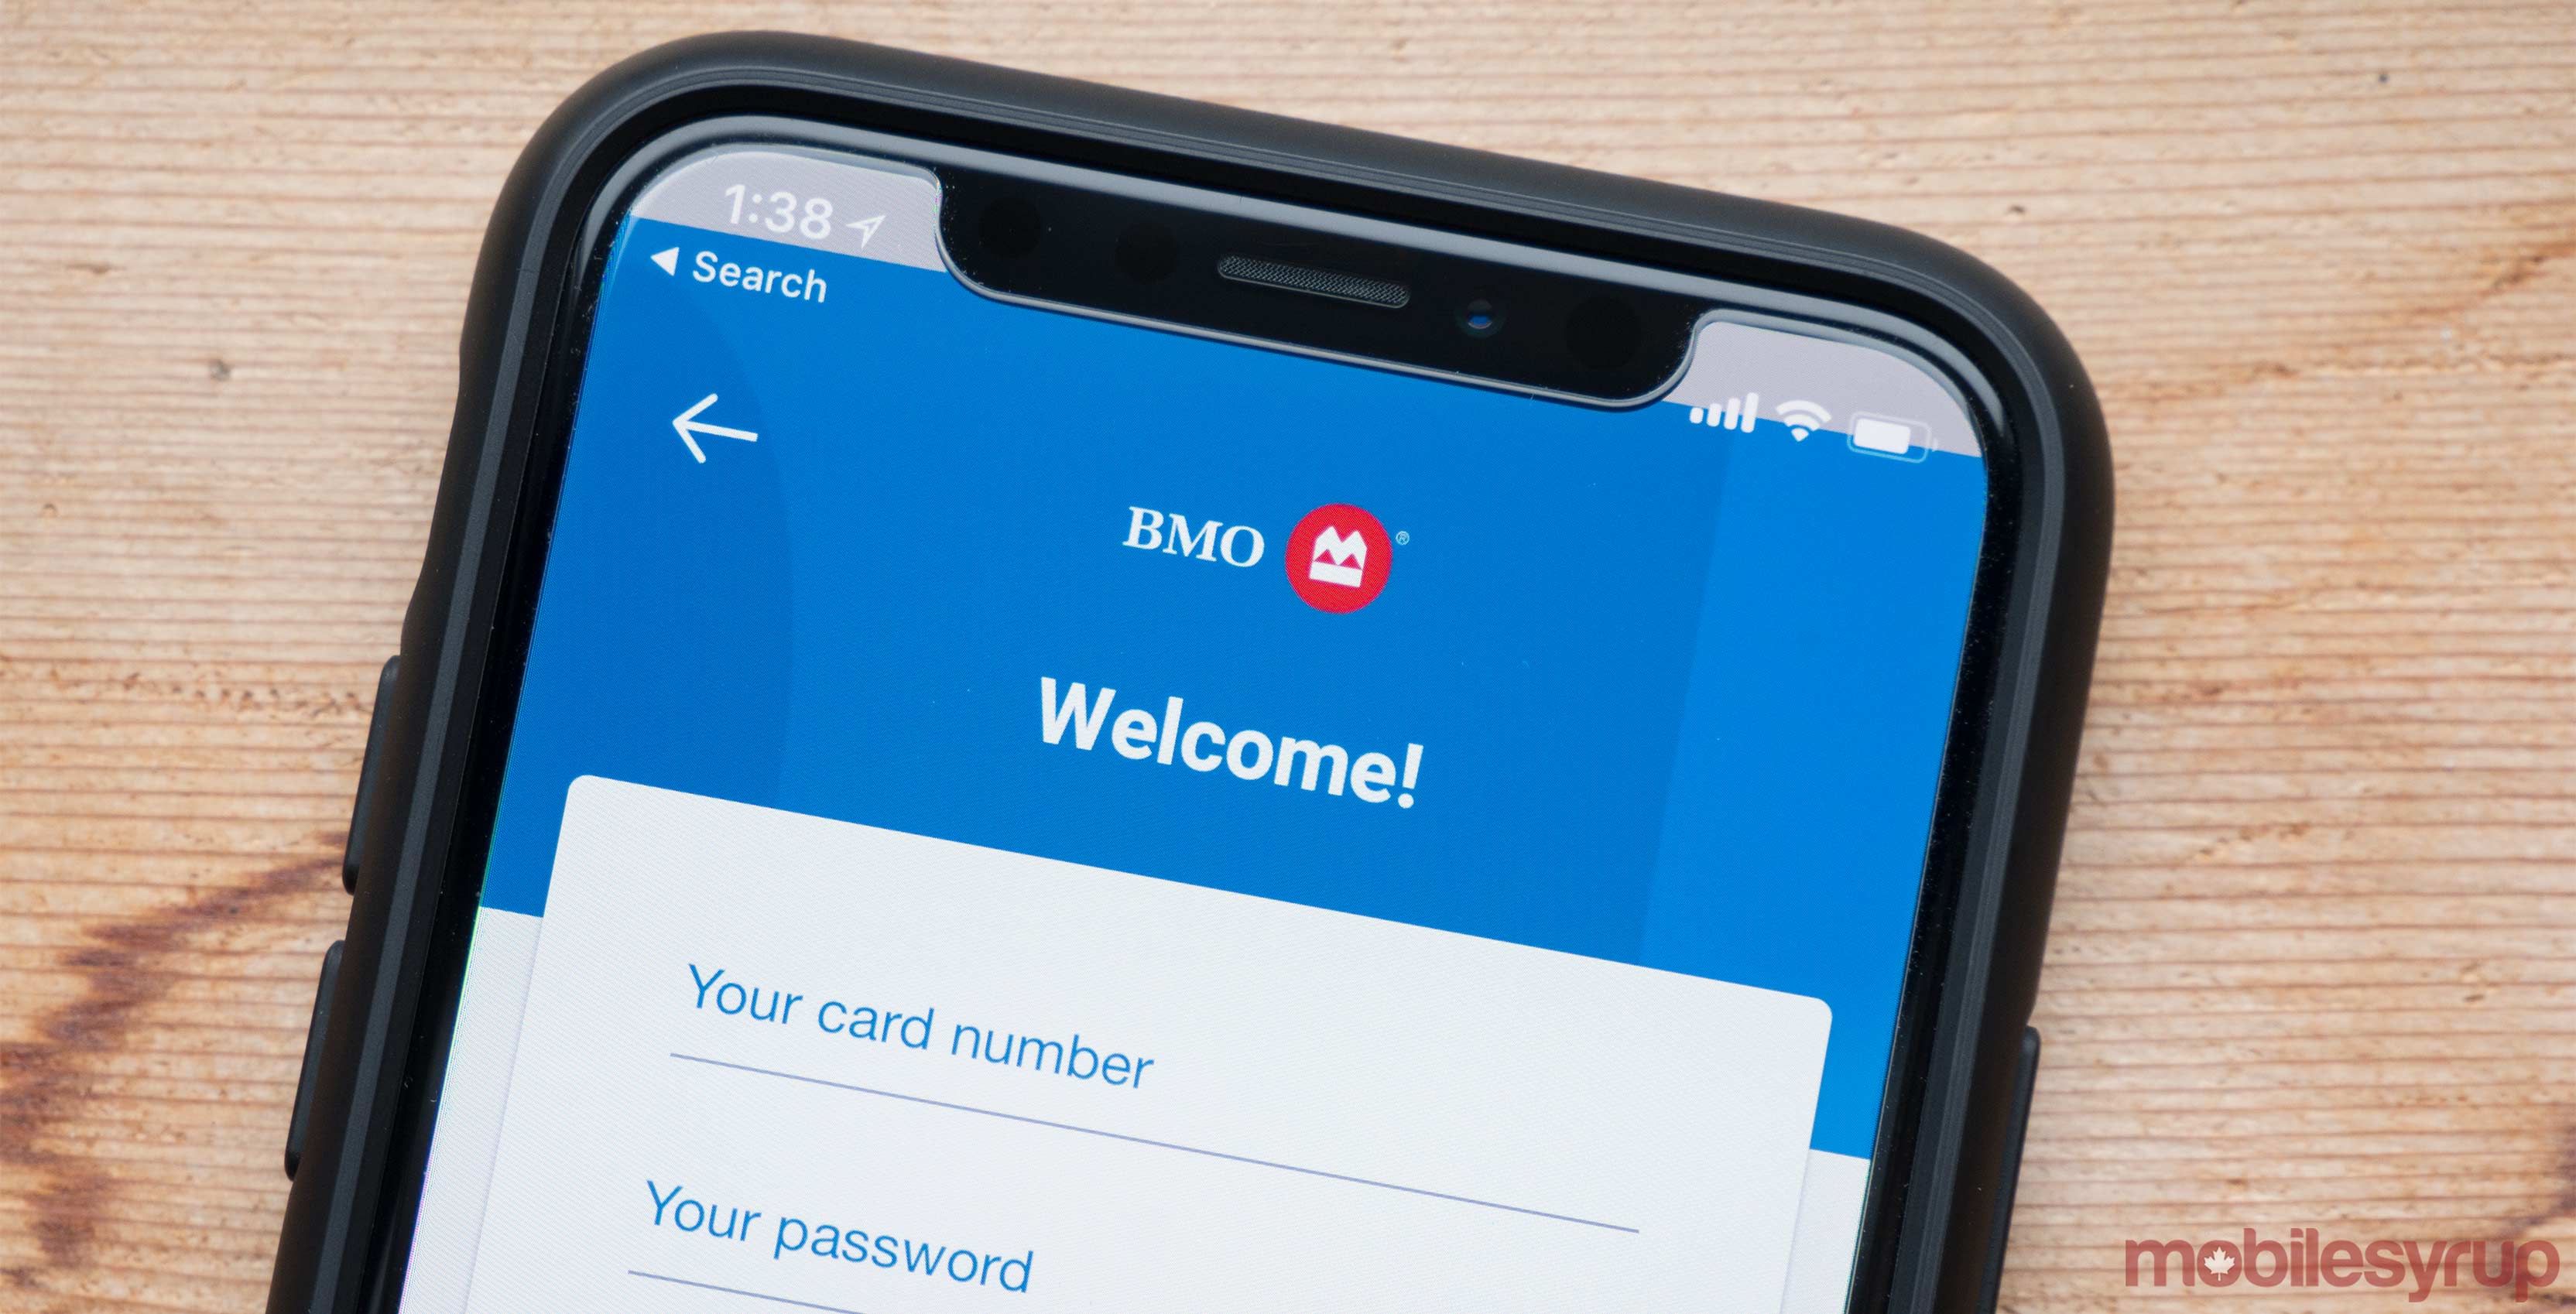 Bmo To Leverage Ai To Deliver Personalized Banking Insights